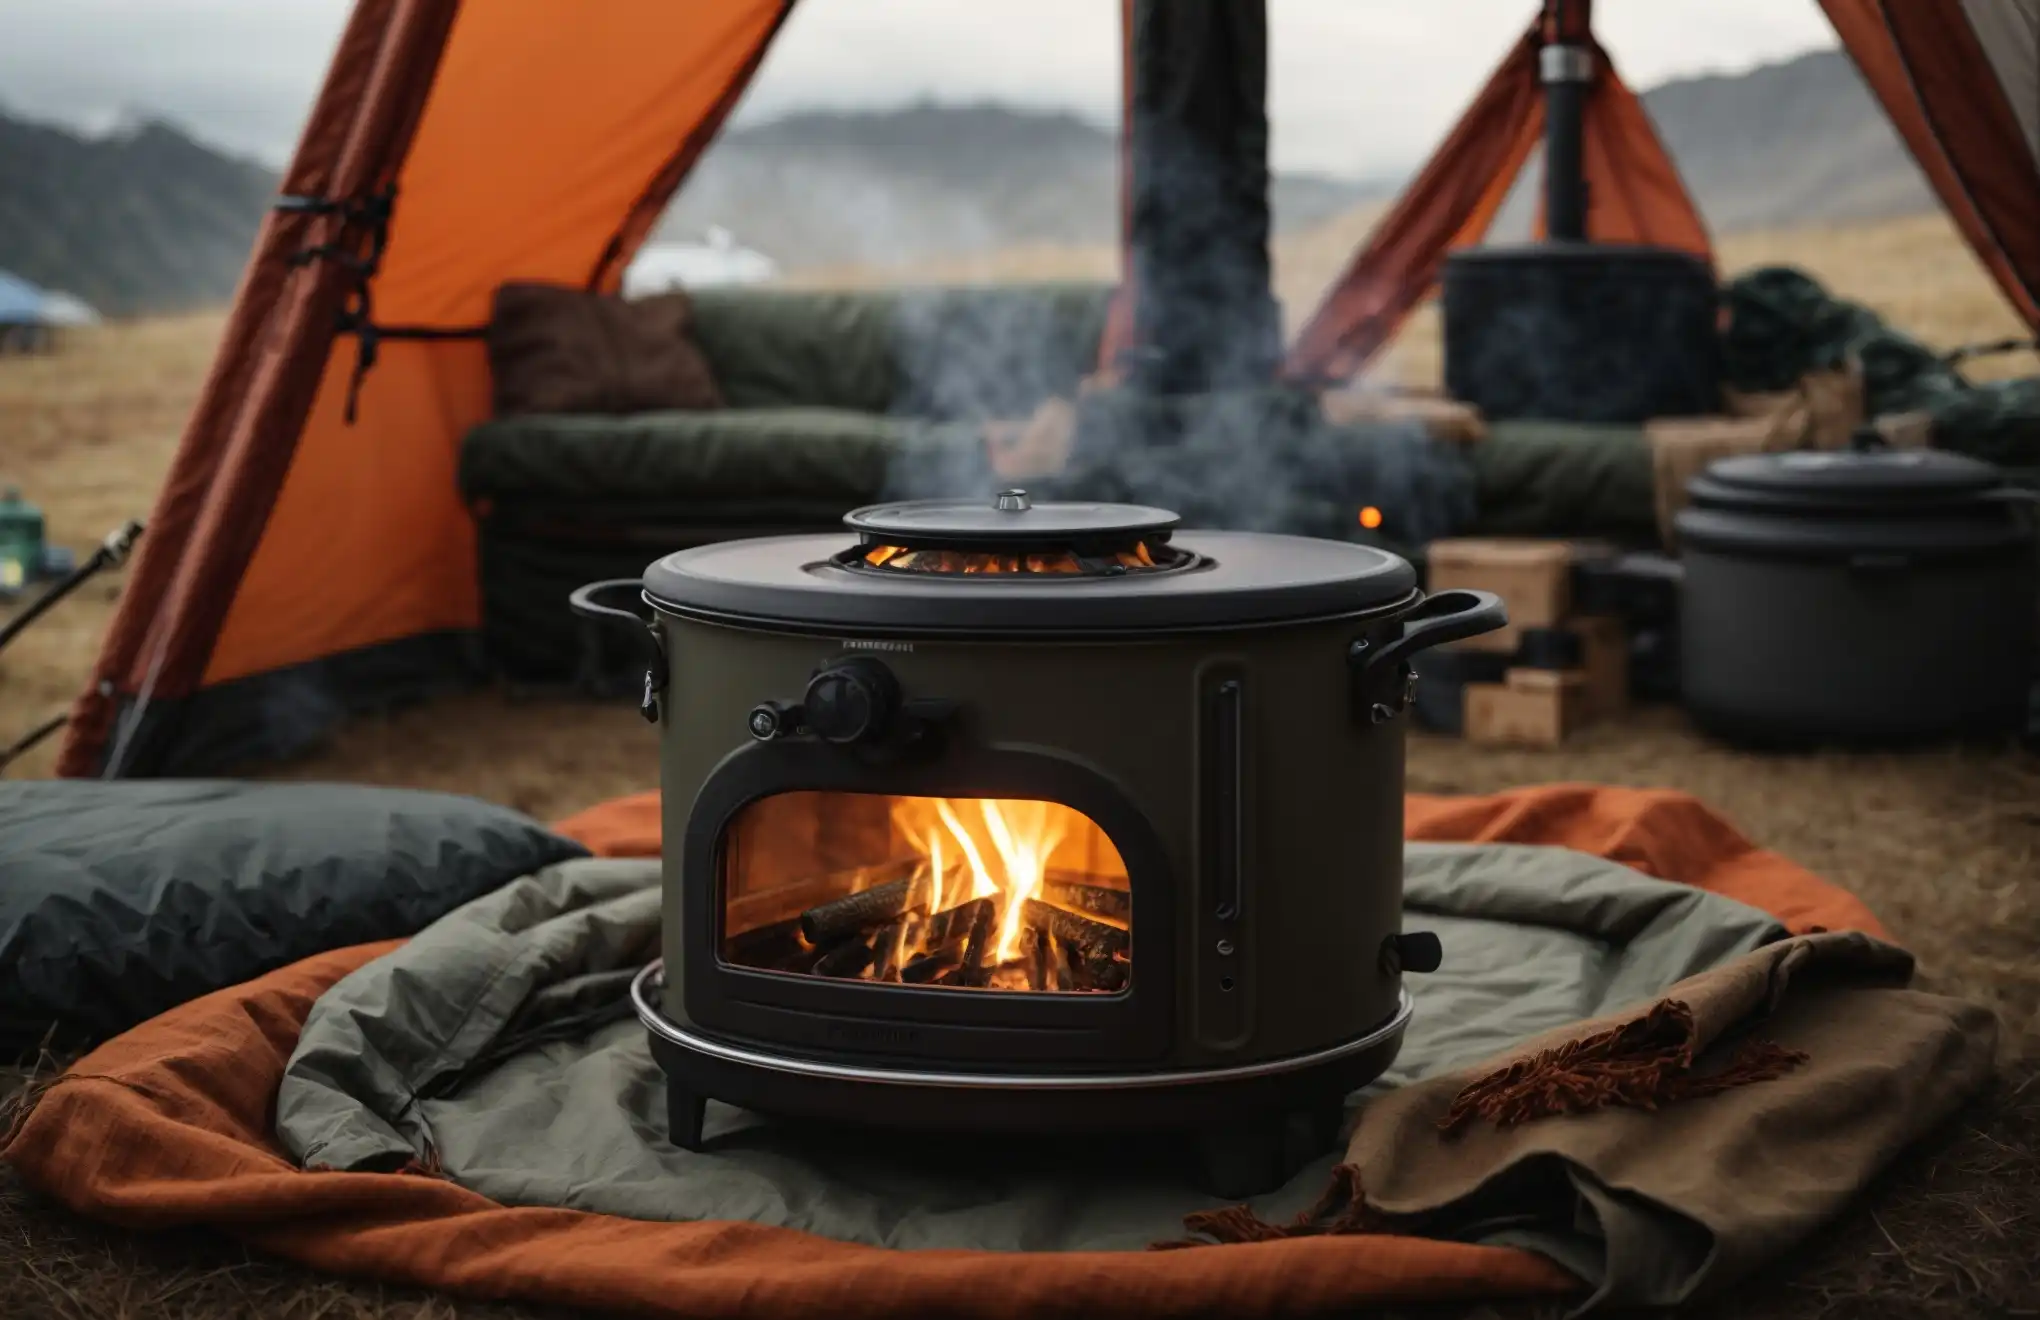 How to Vent a Stove in a Tent